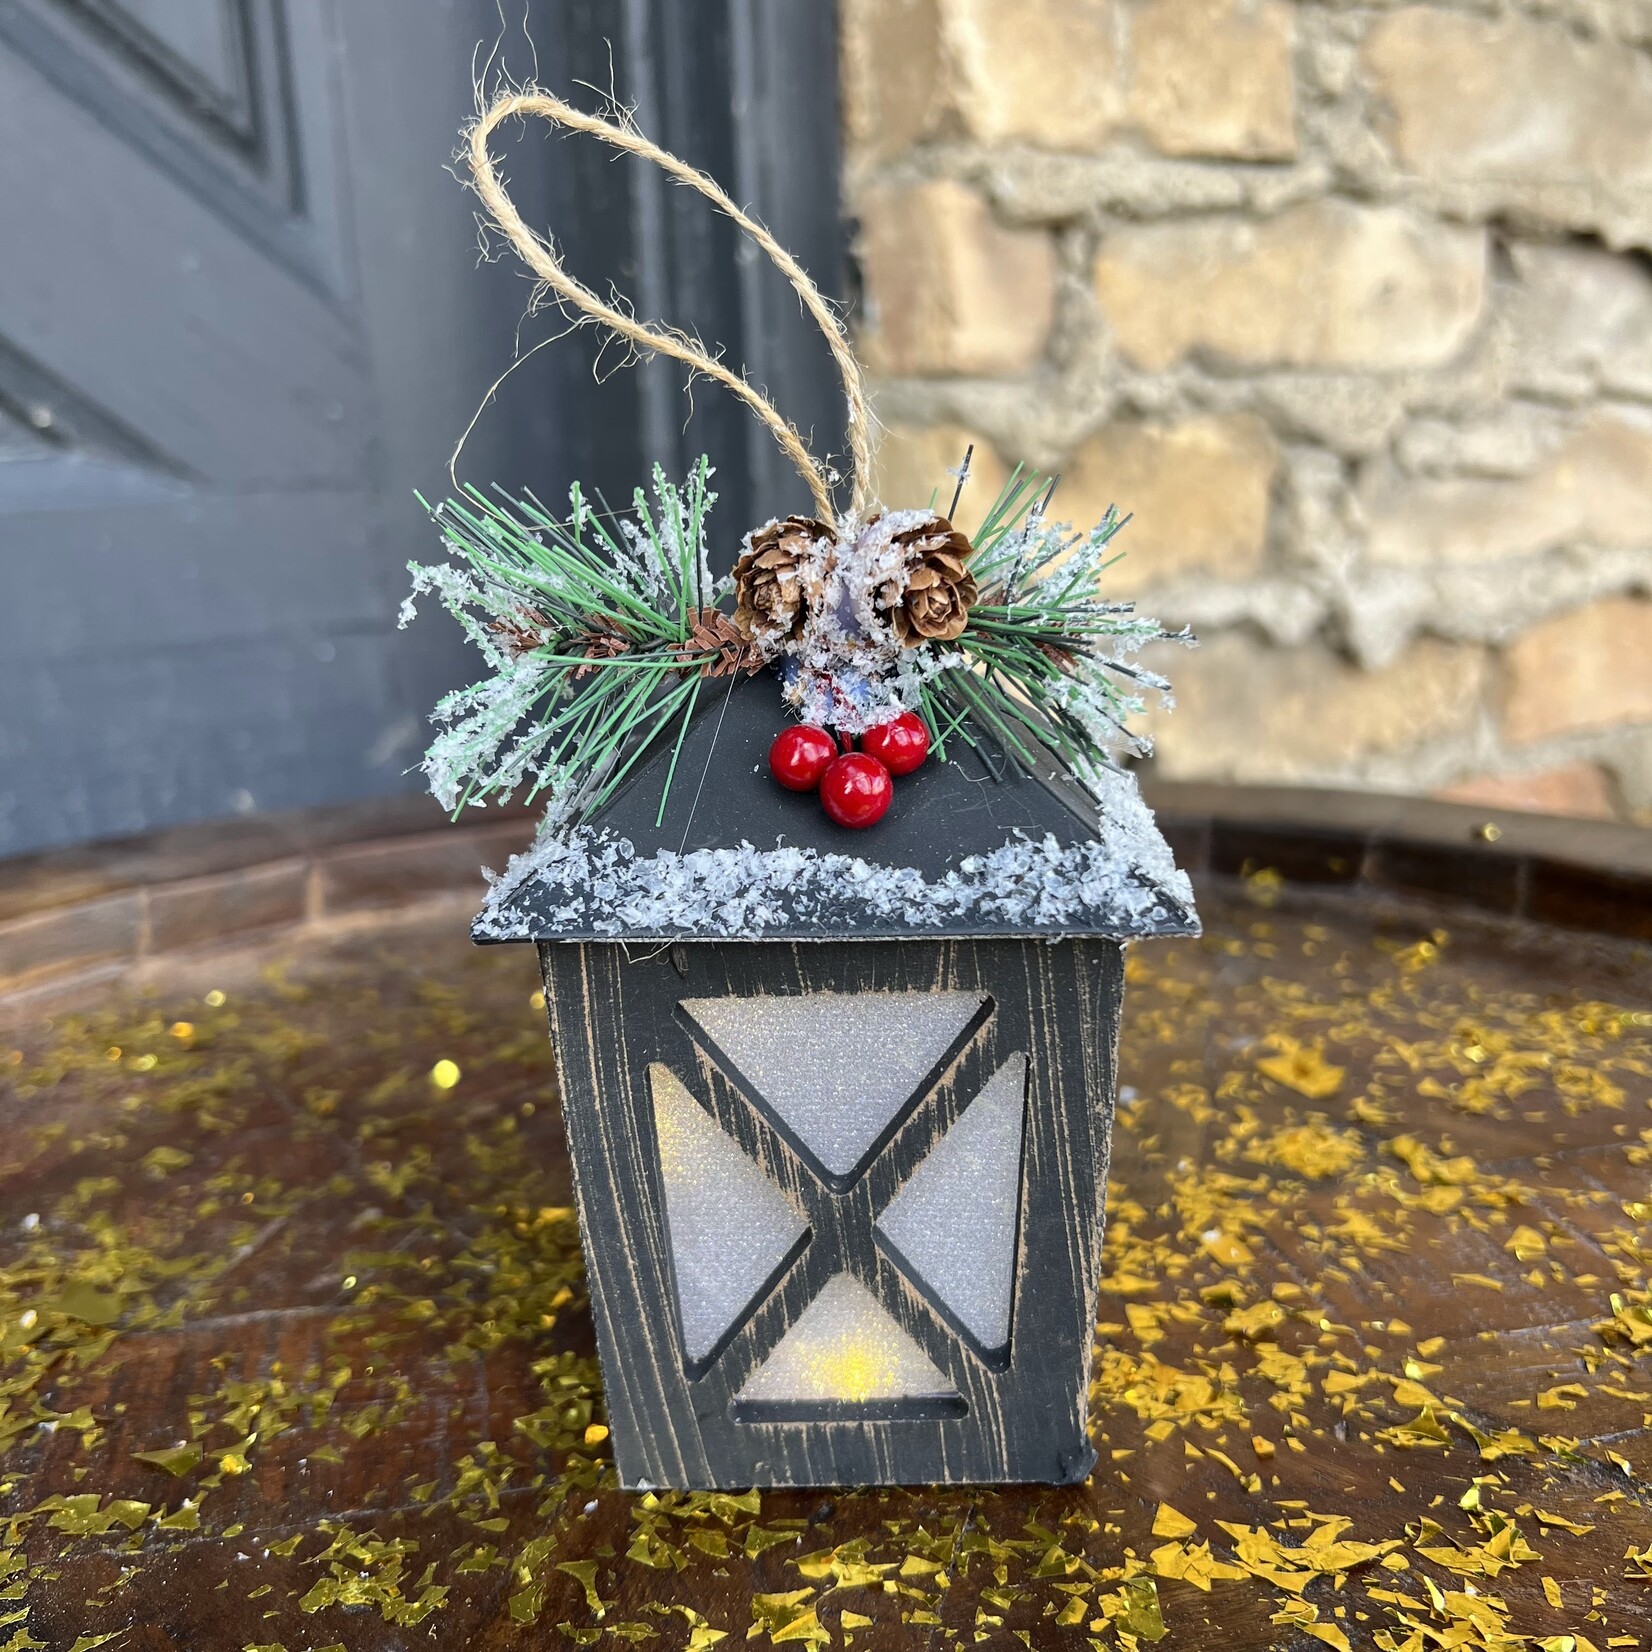 6"  Lighted Lantern Ornaments, Assorted Colors